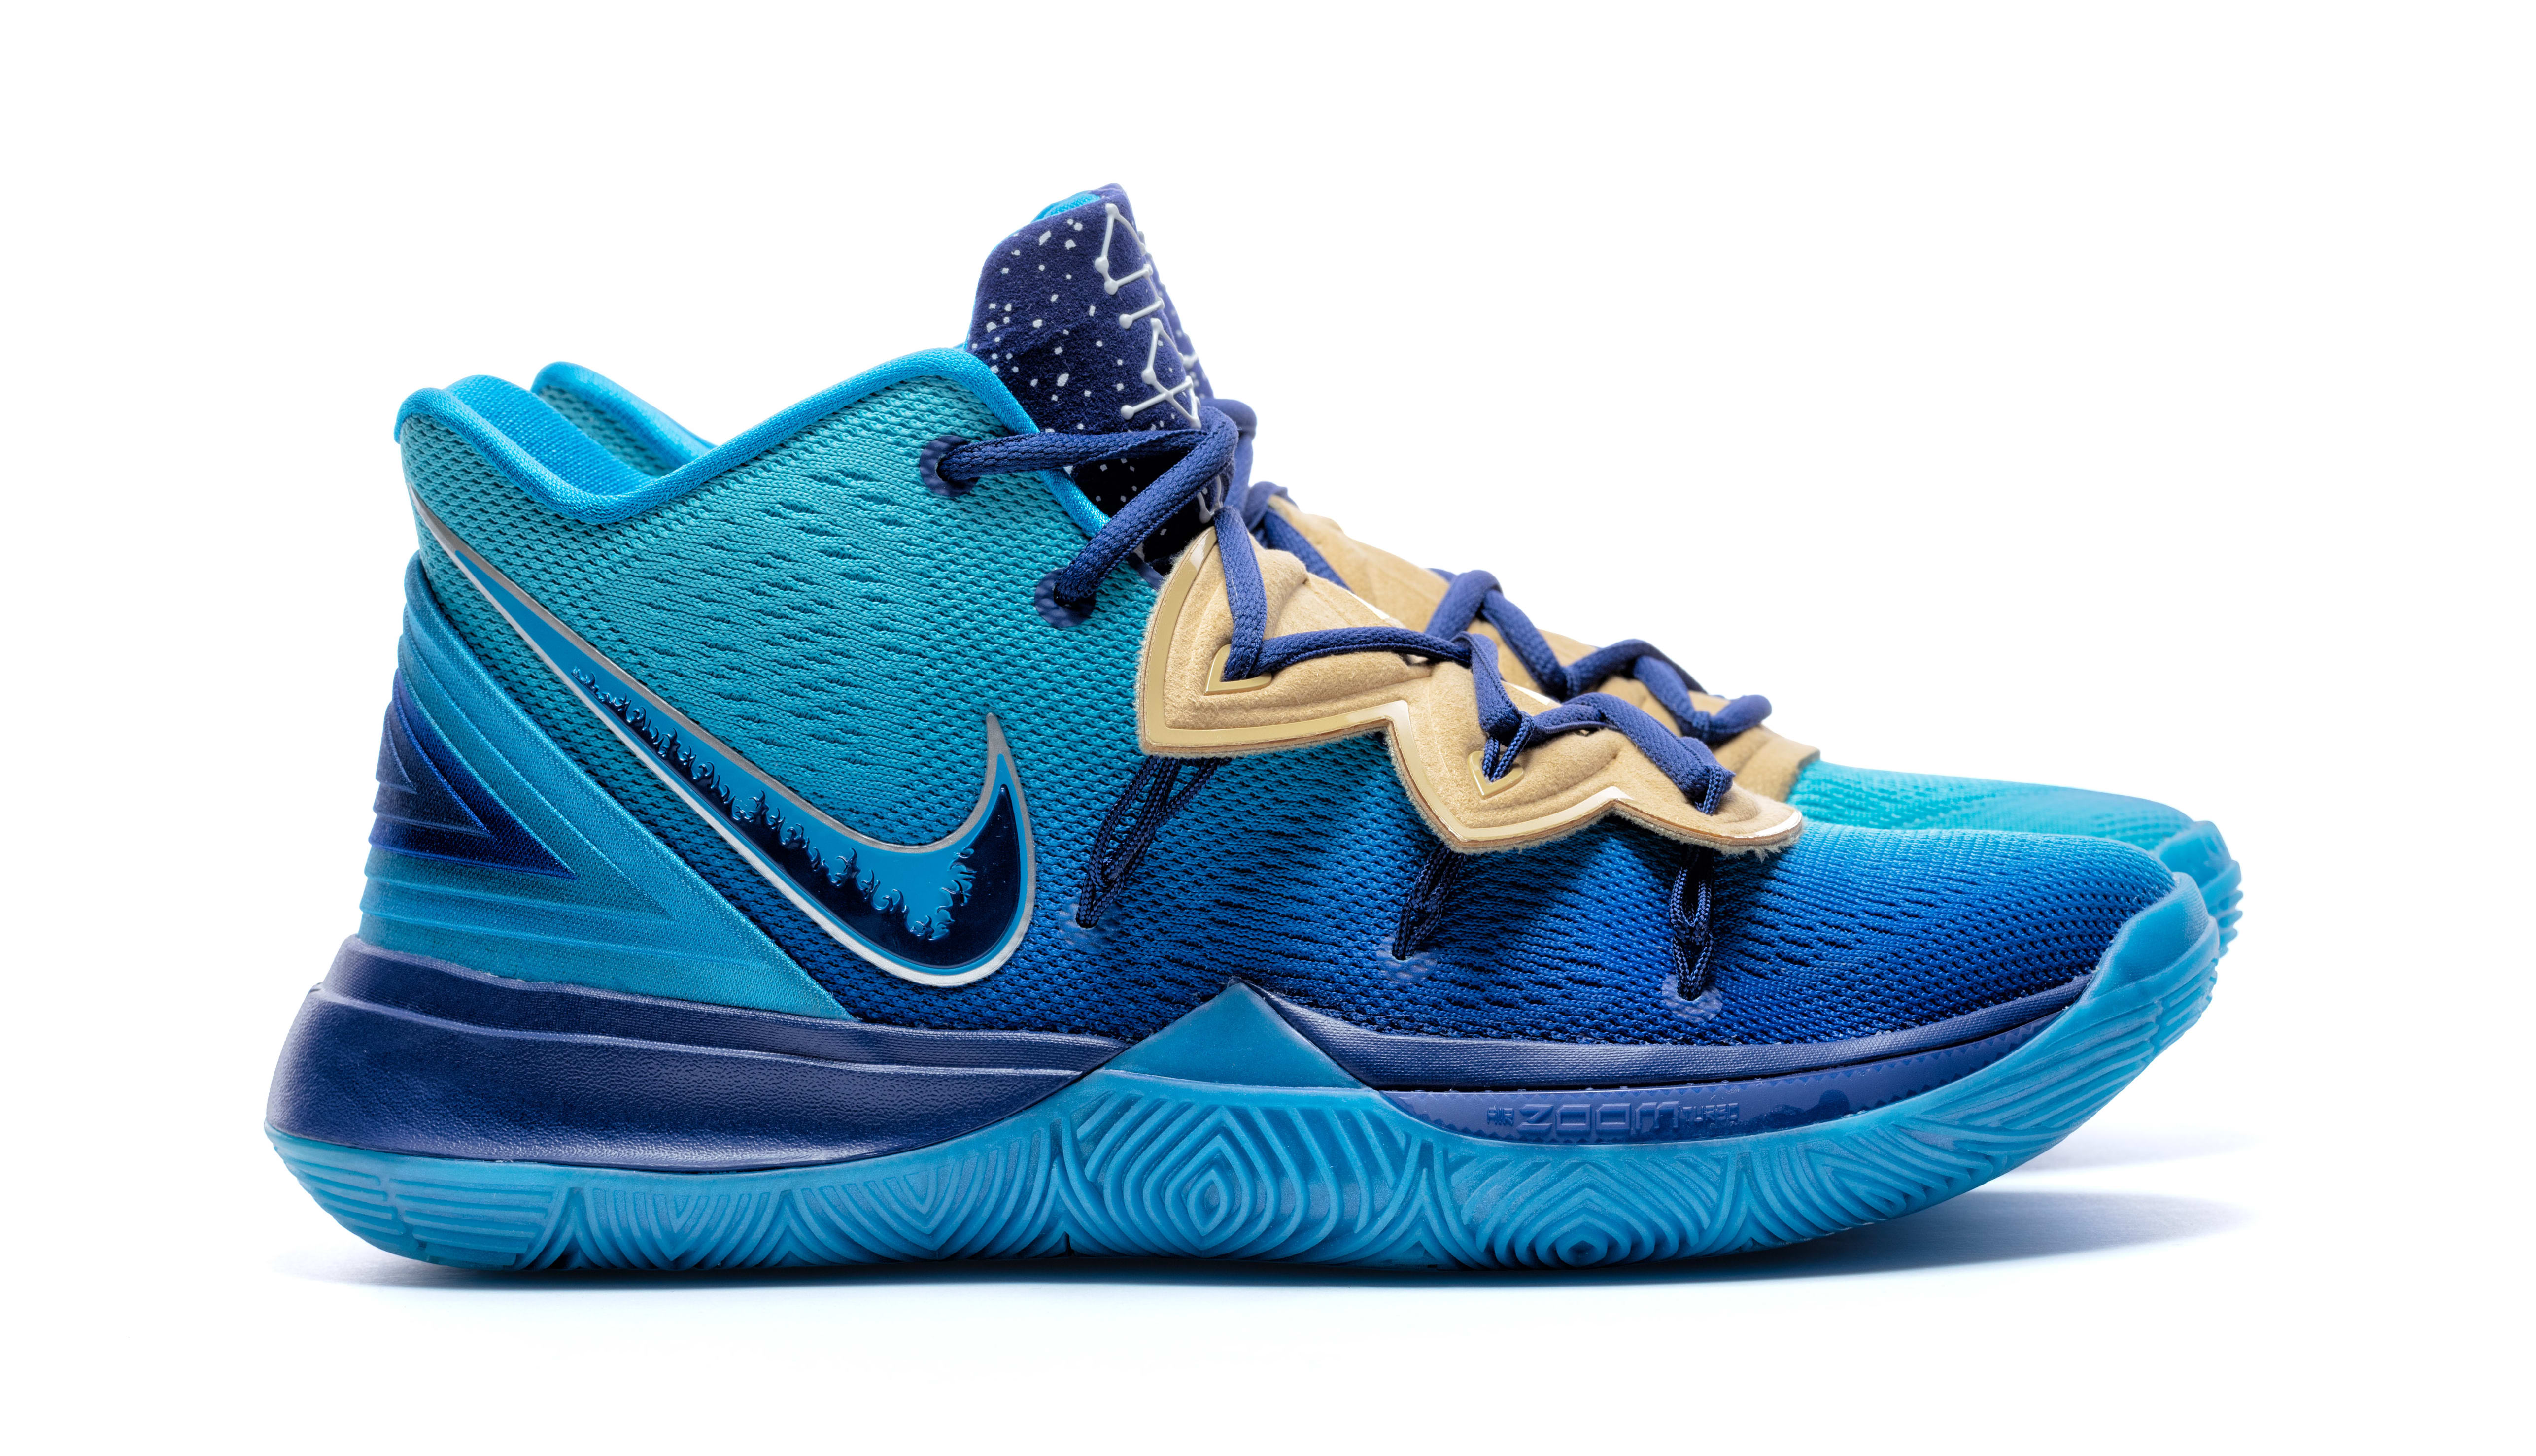 concepts-nike-kyrie-5-orions-belt-lateral